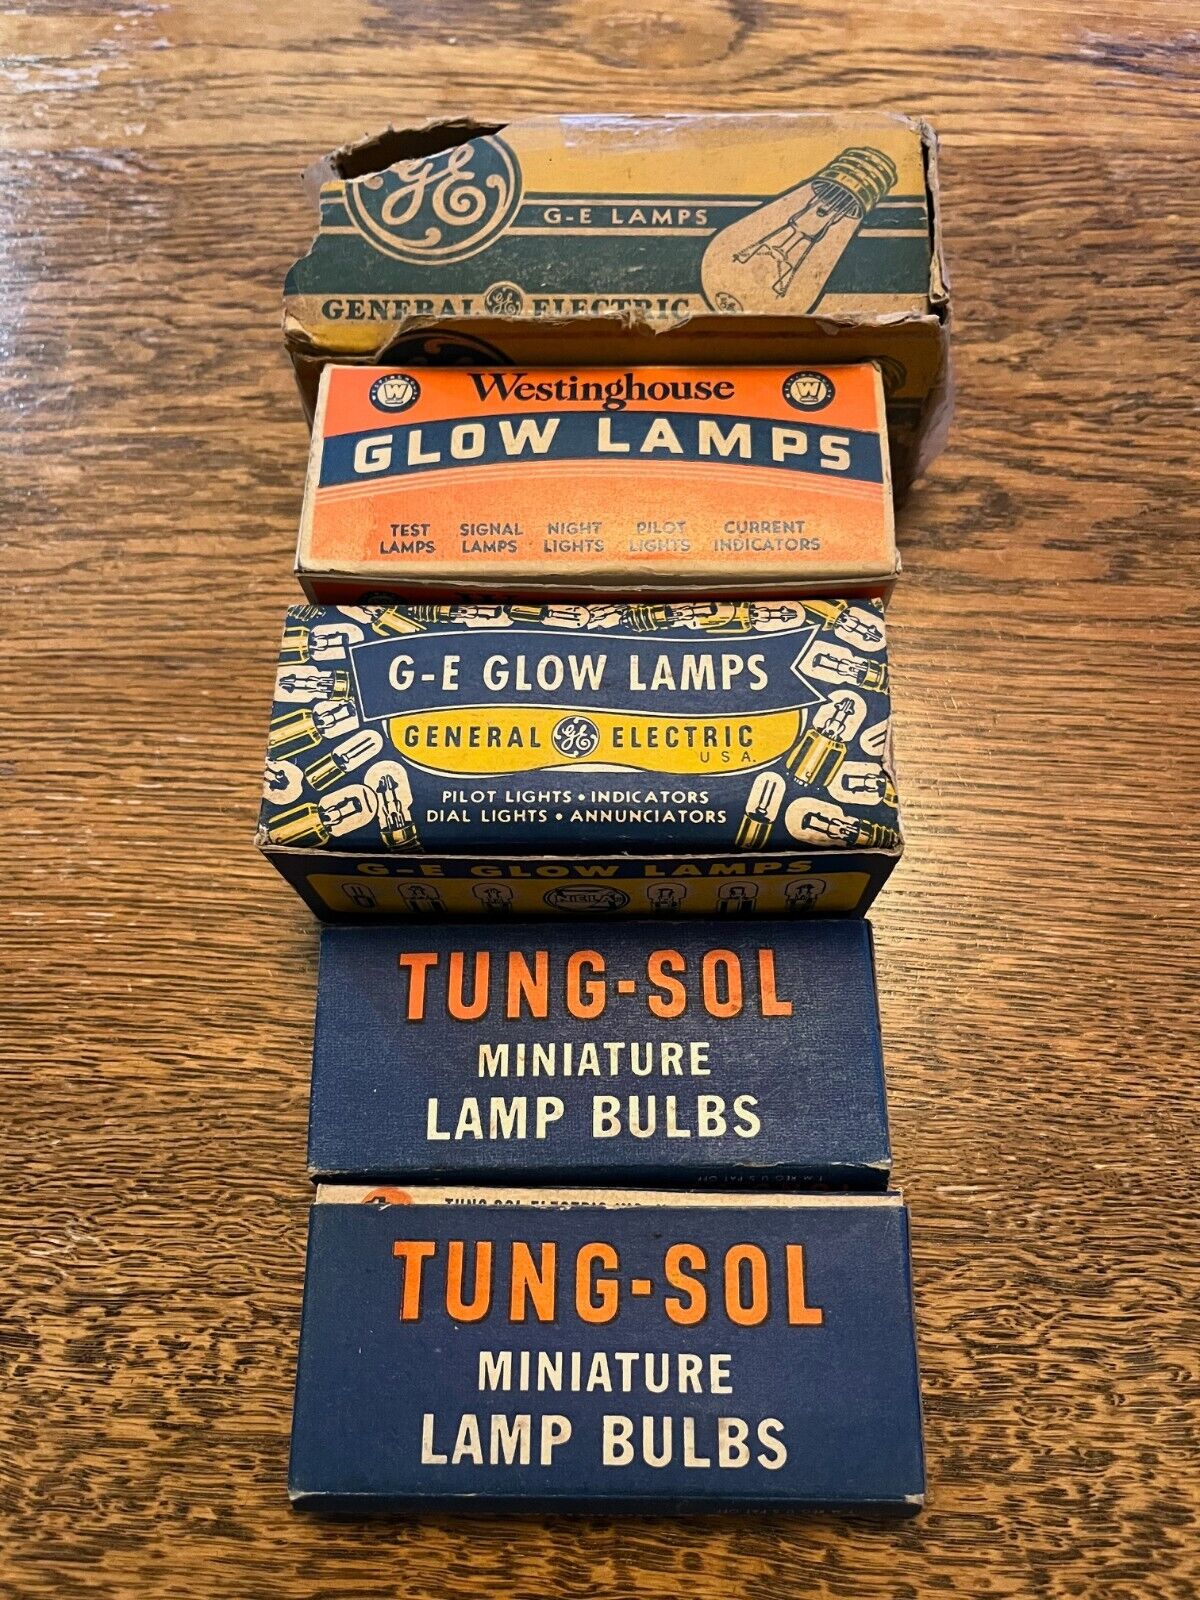 Lot of VINTAGE G-E, Westinghouse, and Tung-Sol Glow Lamps and Bulbs in boxes